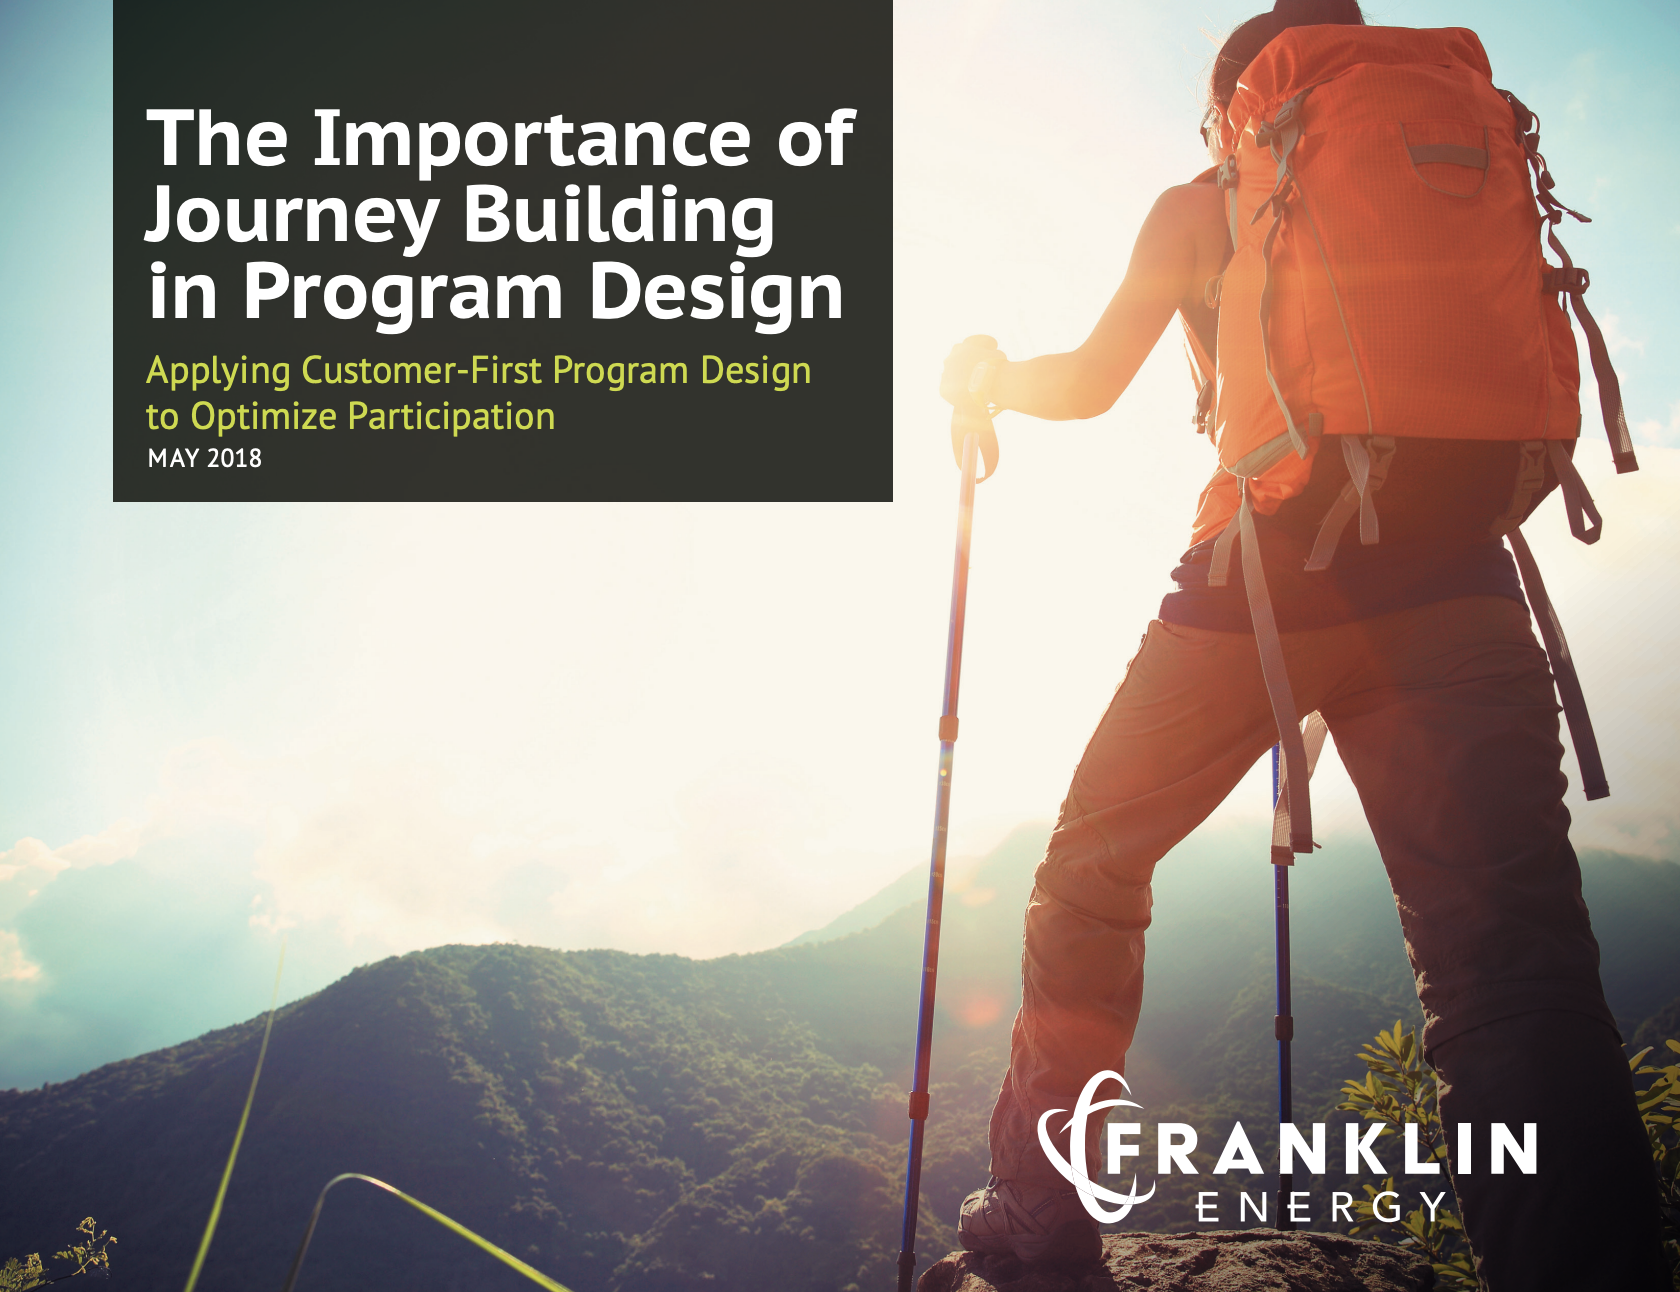 The Importance of Journey Building in Program Design